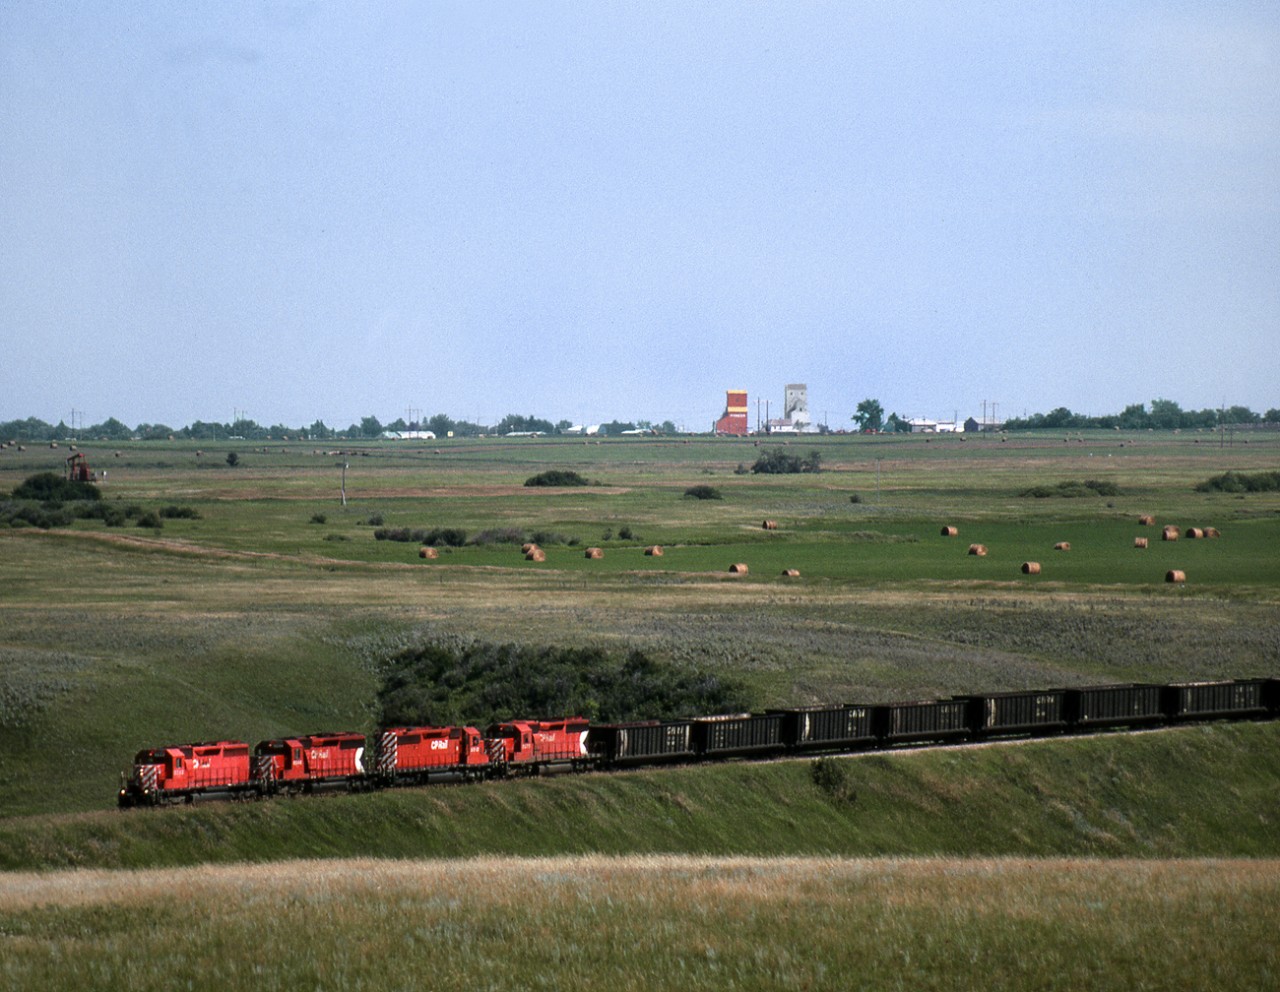 Westbound coal empties from Atikokan Ontario to Bienfait Saskatchewan cross the Moose Mountain Creek between Oxbow and Alameda. The construction of the Alameda dam required a diversion resulting in a tunnel under the wing of the dam near this location. Unit coal trains have long since ceased being replaced by oil trains from the Baaken formation.  The Bienfait coal mines still fuel 2 power plants near Estevan.